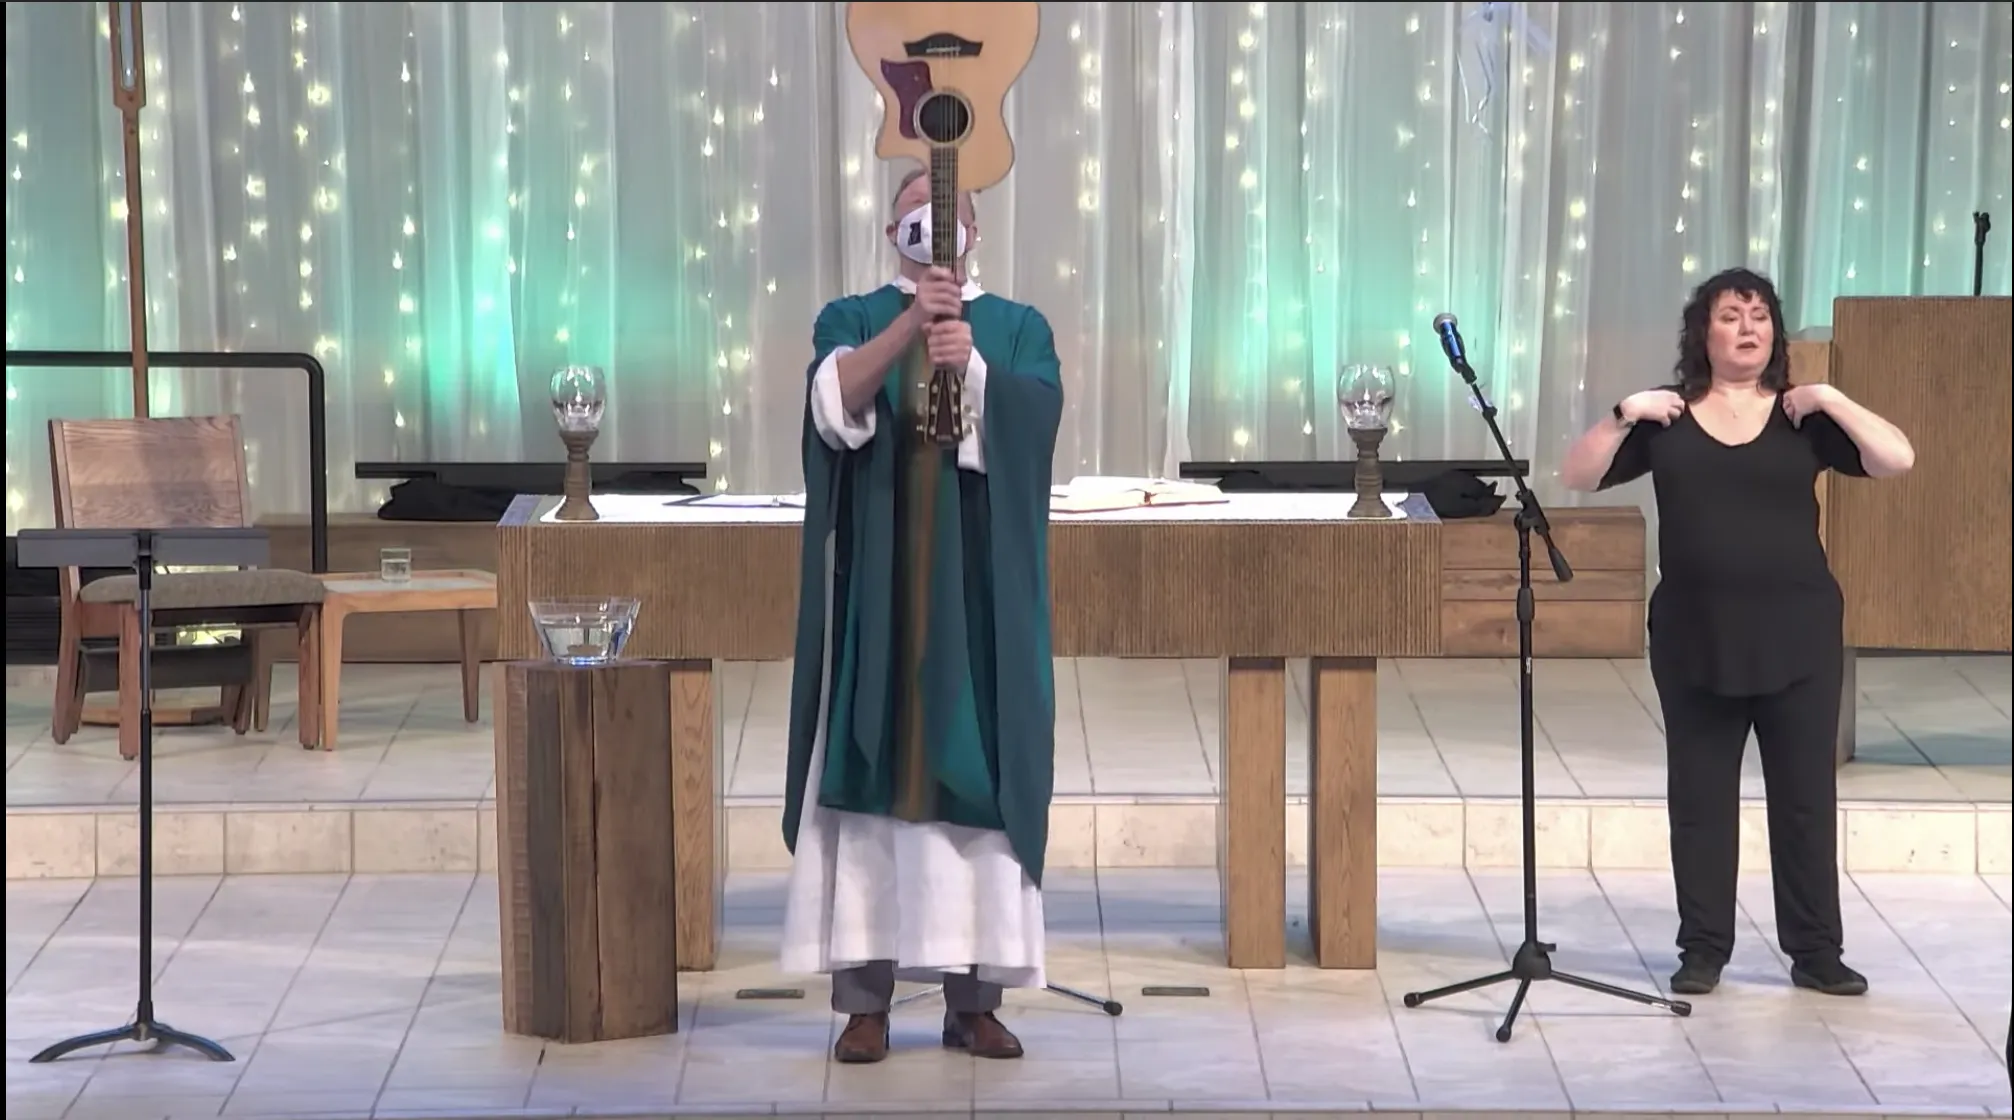 Father Terrence M. Keehan, pastor of Holy Family Catholic Church in Inverness, Illinois, using a guitar to give the final blessing at a Mass livestreamed on Feb. 13, 2022.?w=200&h=150